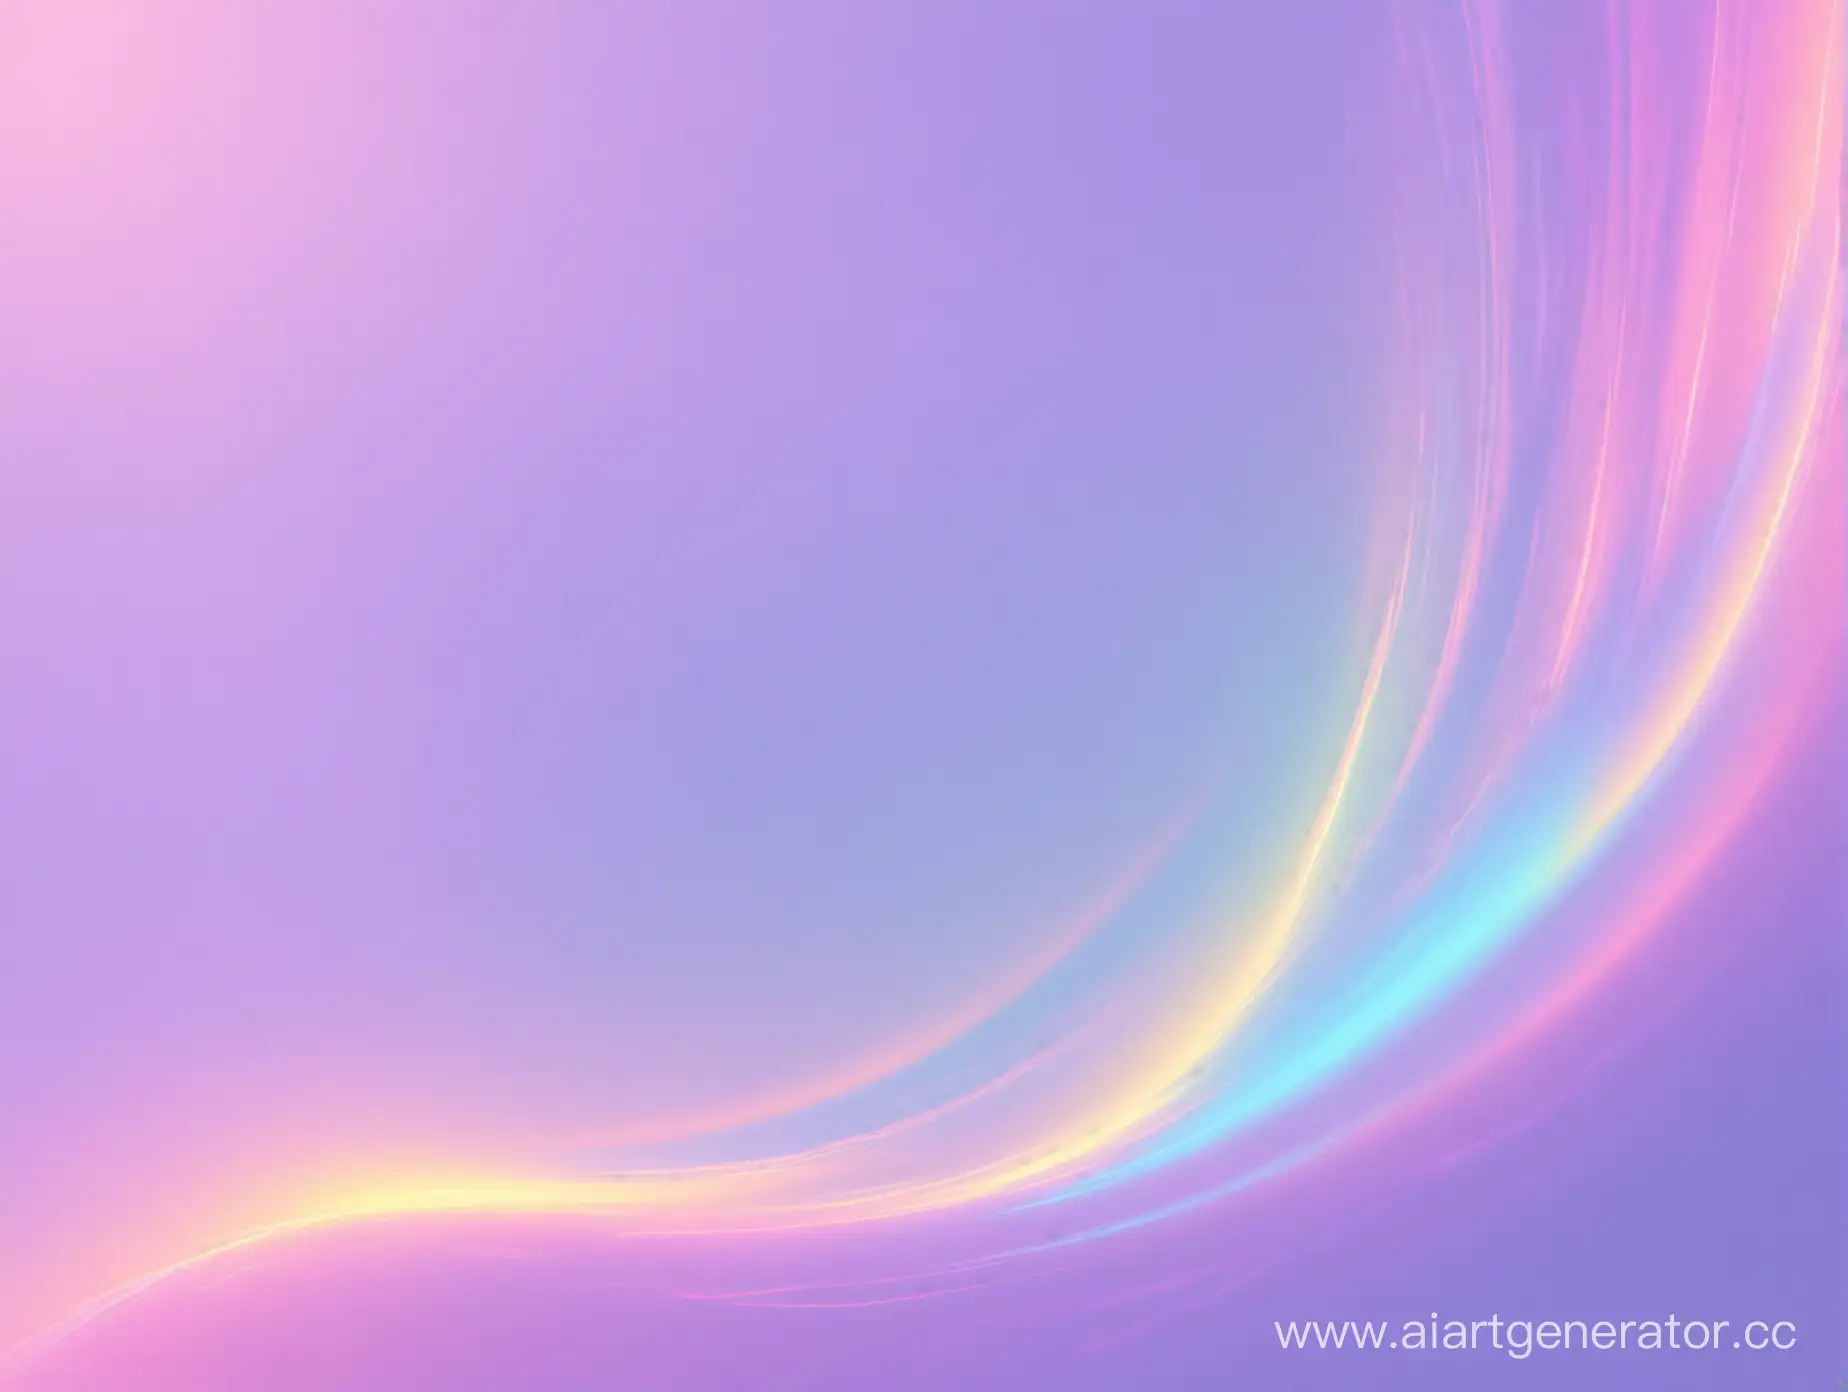 Futuristic-Holographic-Background-with-Vibrant-Colors